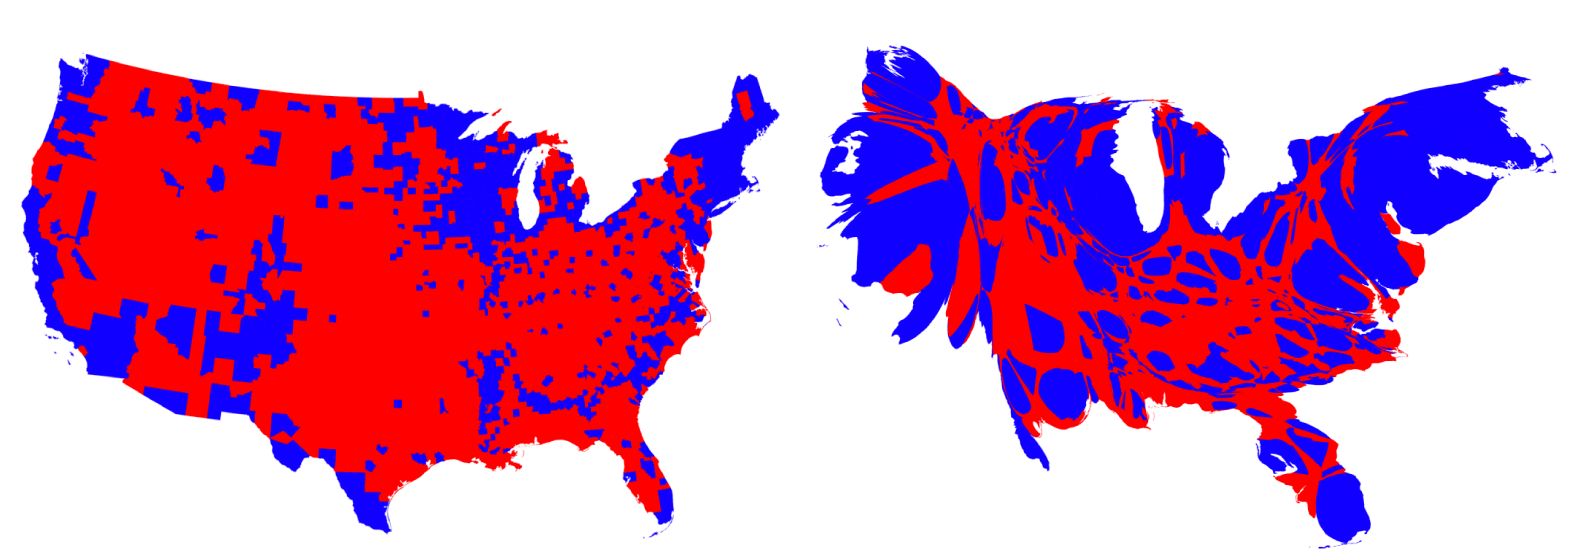 Election results by county.